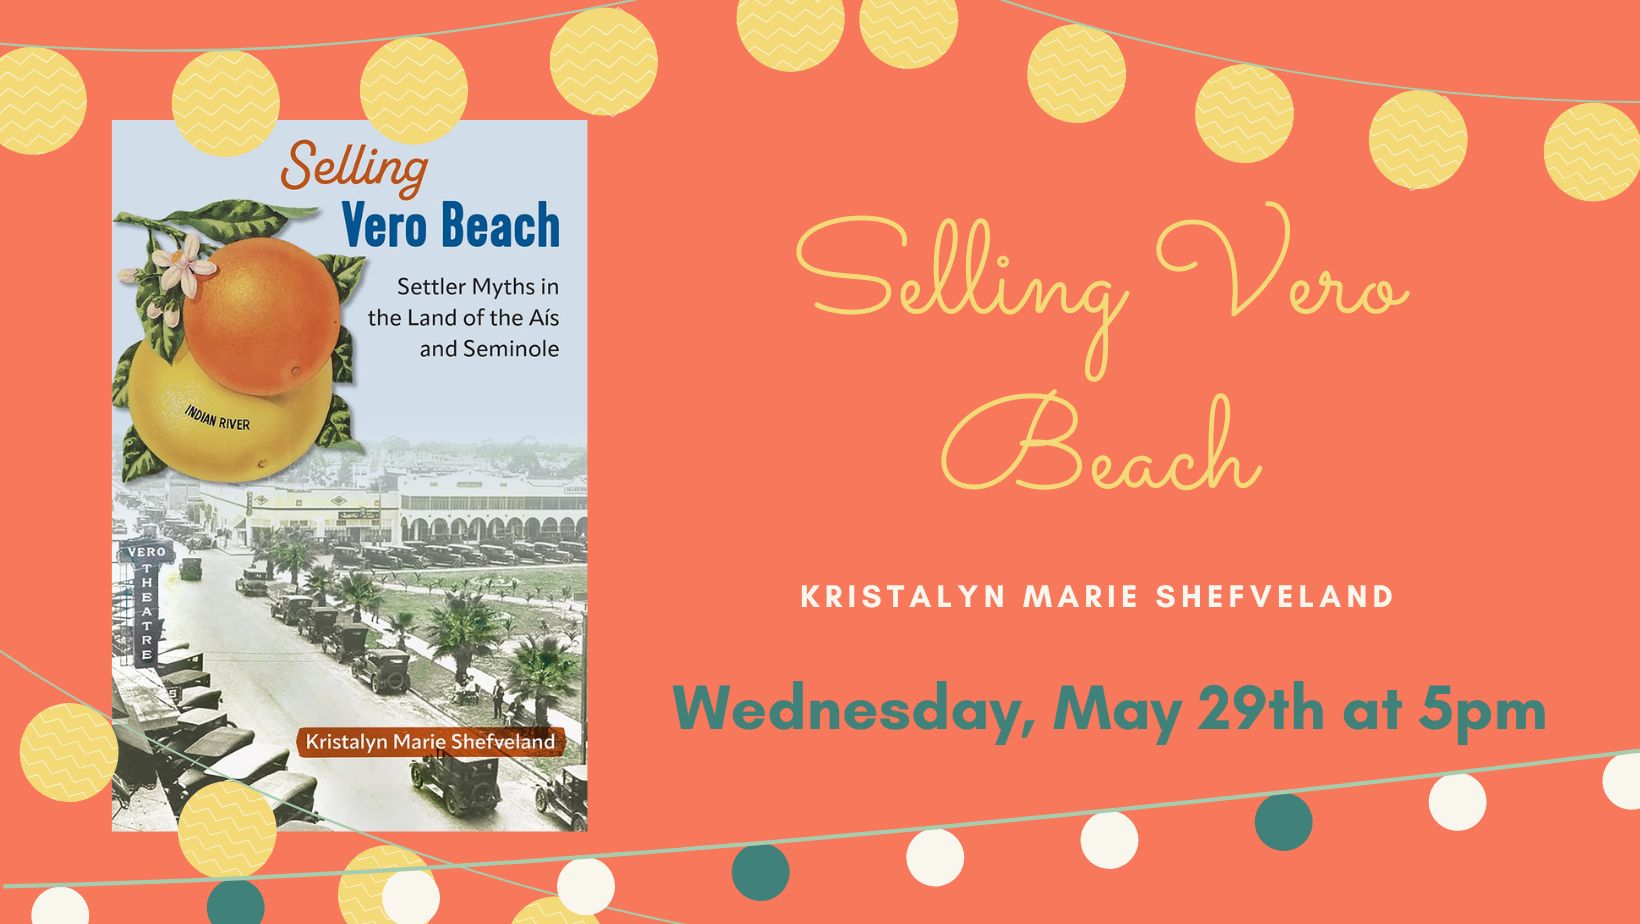 Selling Vero Beach event with Kristalyn Marie Shefveland